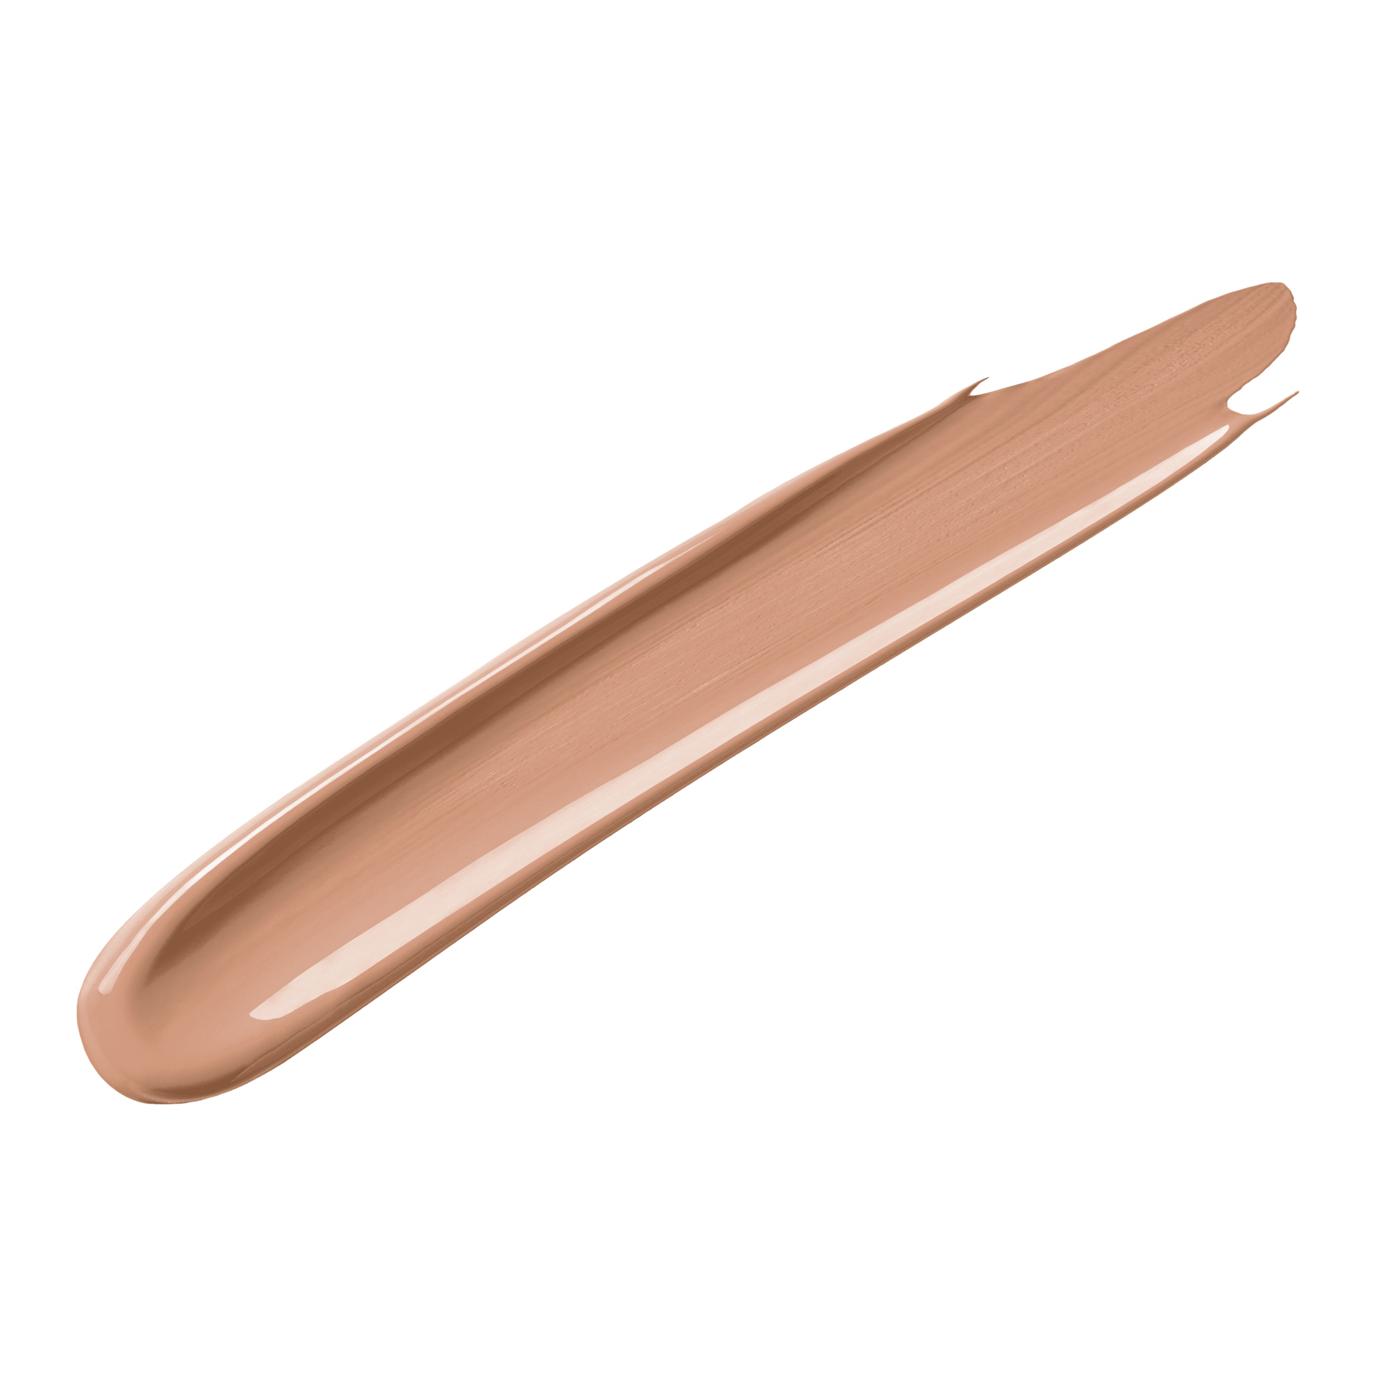 Covergirl Clean Invisible Concealer - Classic Beige; image 9 of 15